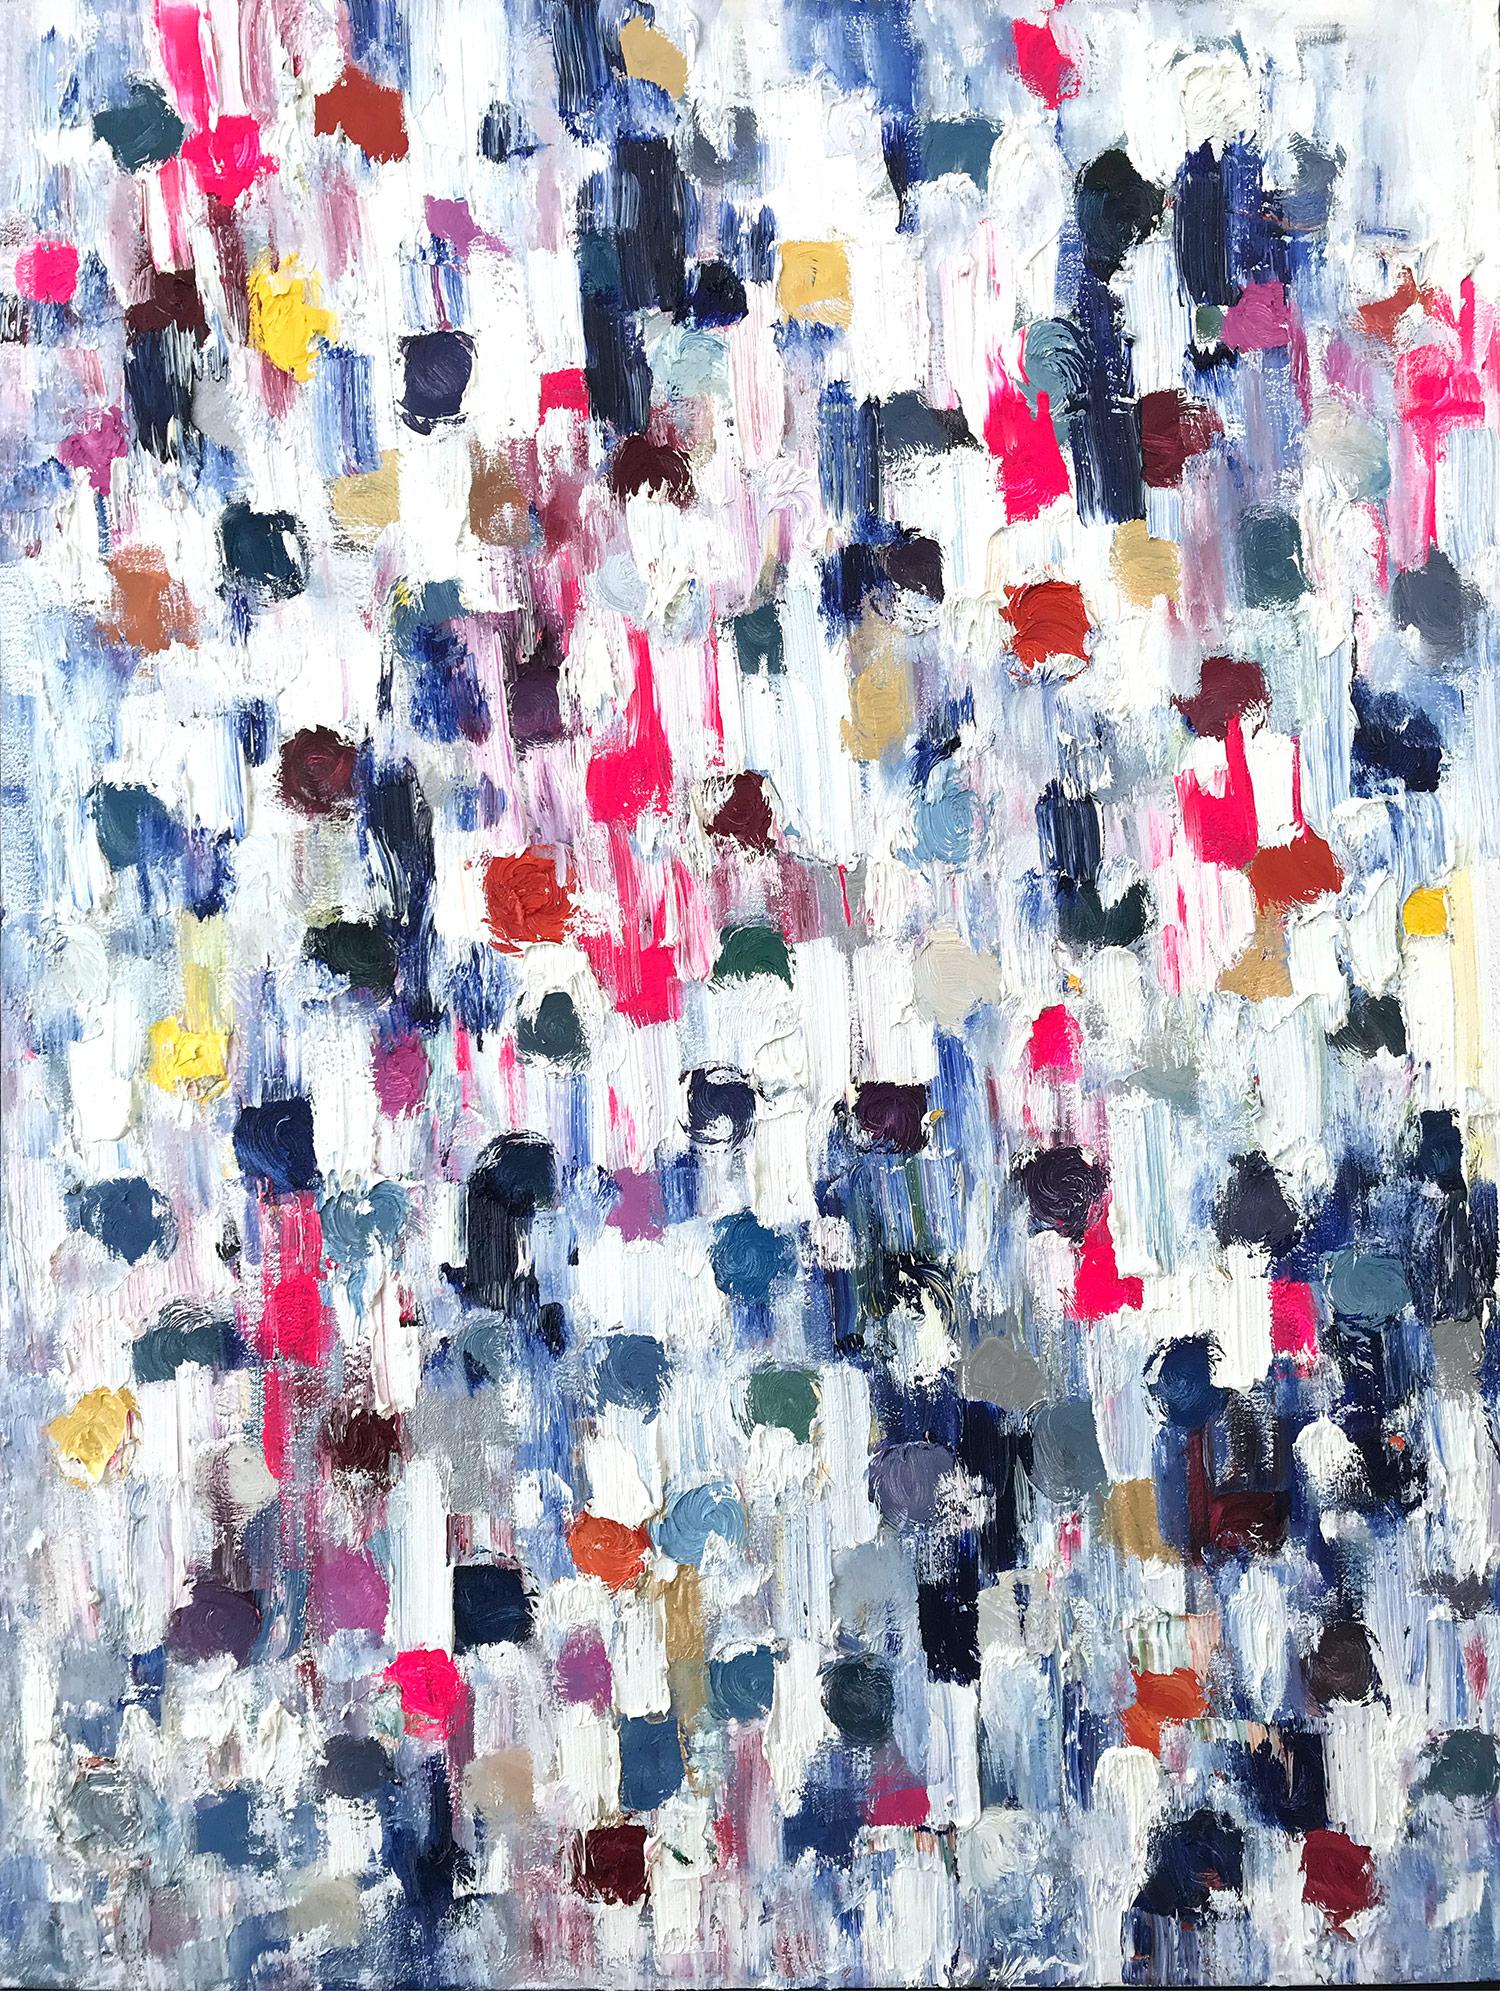 Cindy Shaoul Abstract Painting - "Dripping Dots - Jardin du Luxembourg" Colorful Abstract Oil Painting on Canvas